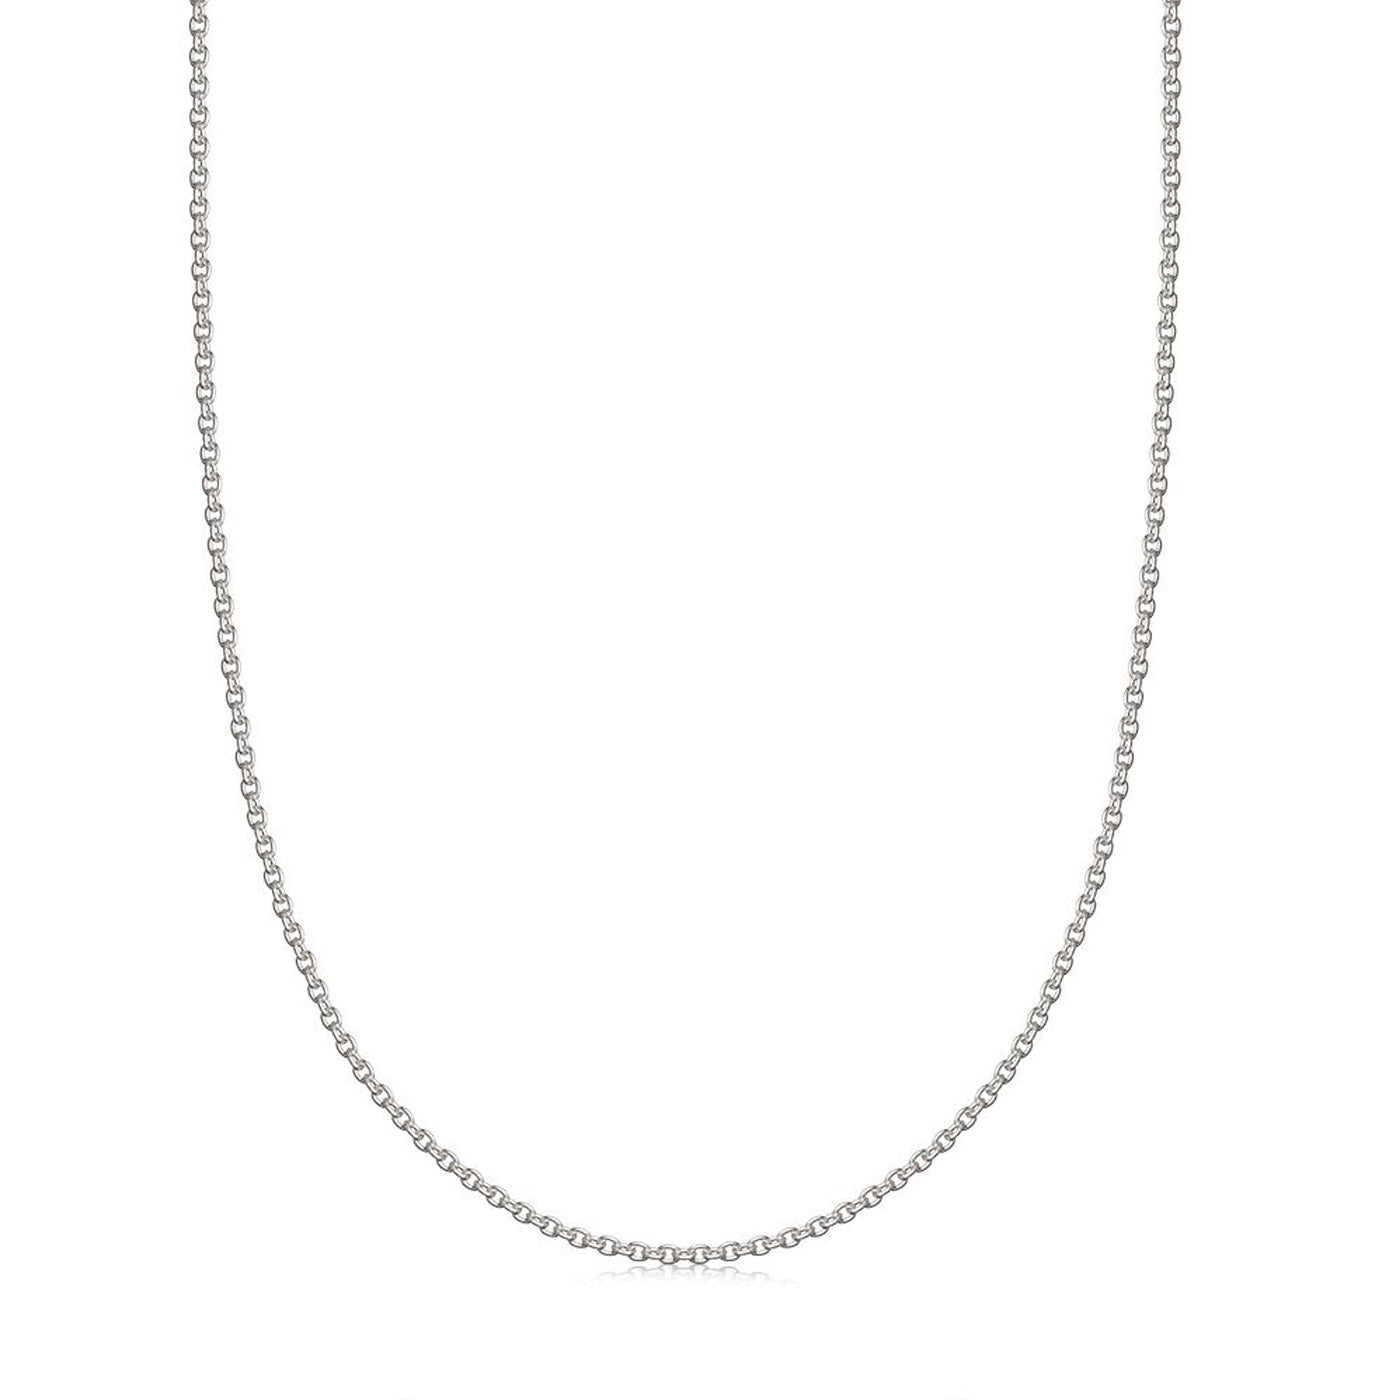 Sterling Silver Trace Chains | Hersey & Son Silversmiths